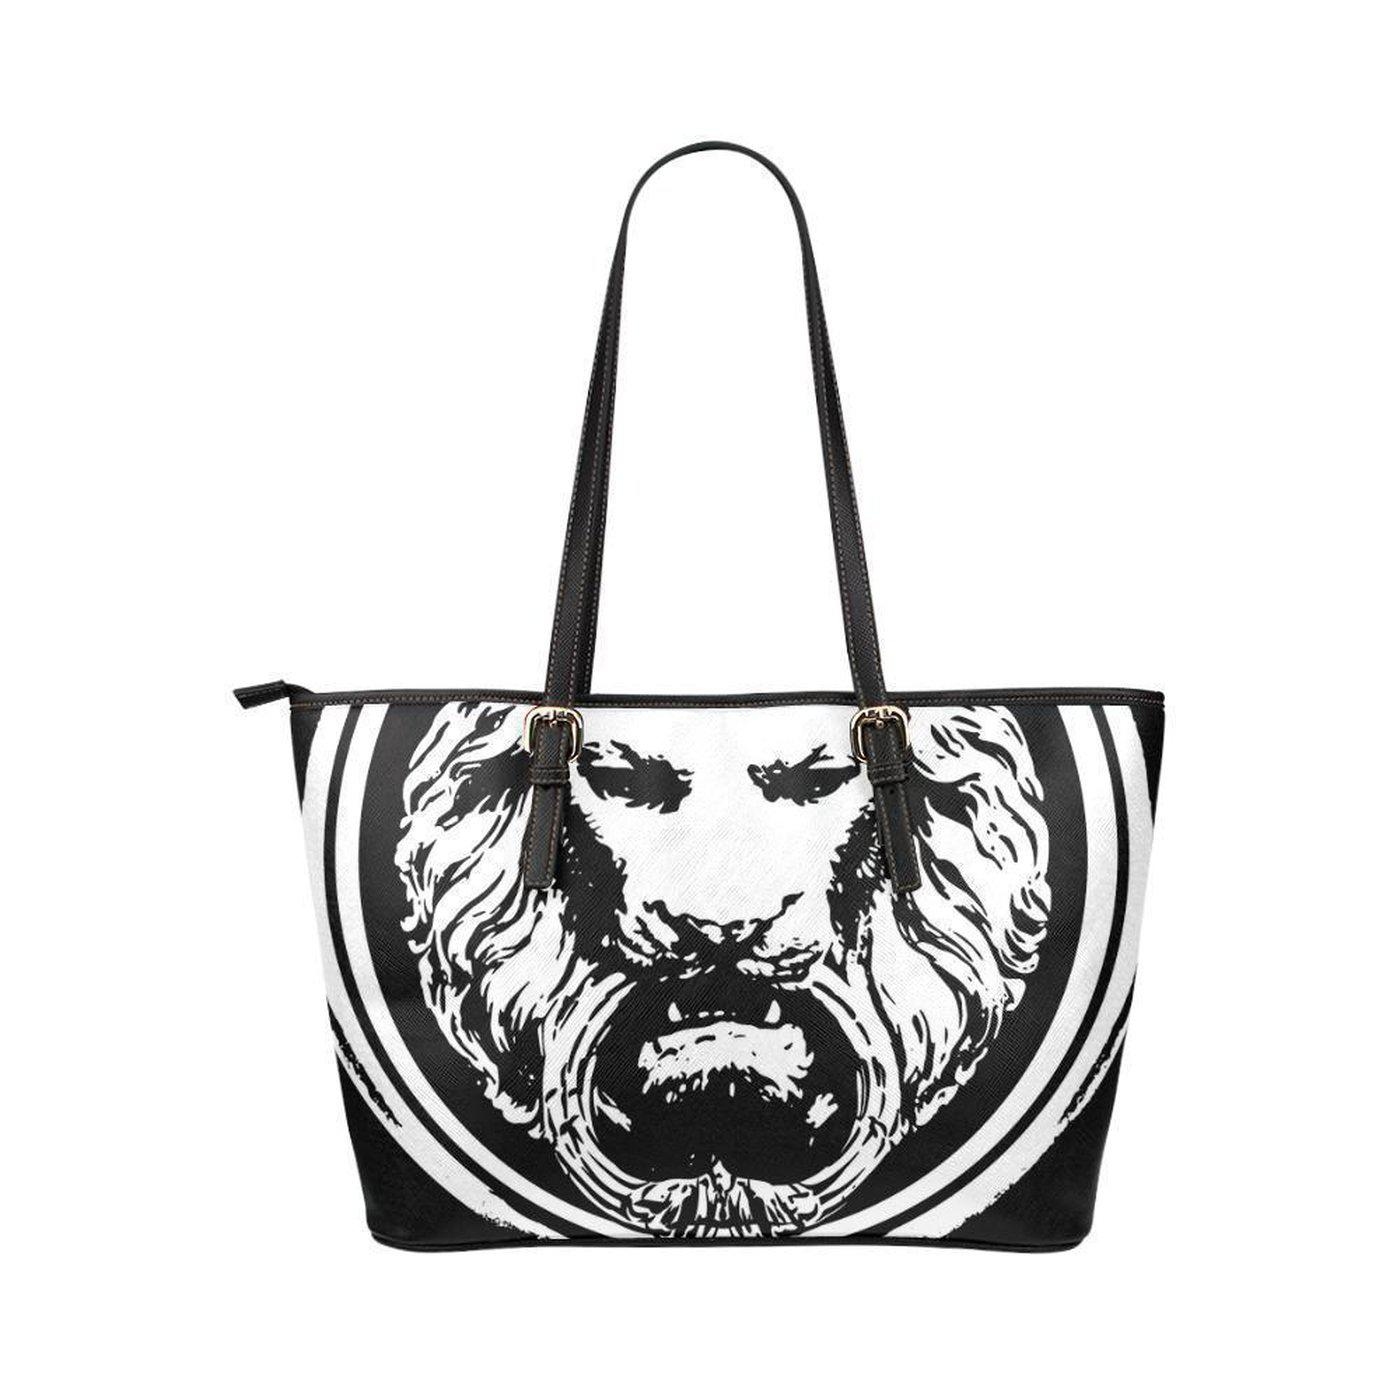 NO FIXED ABODE,Lion Large Black PU Leather Tote Bag,Bags,One Size